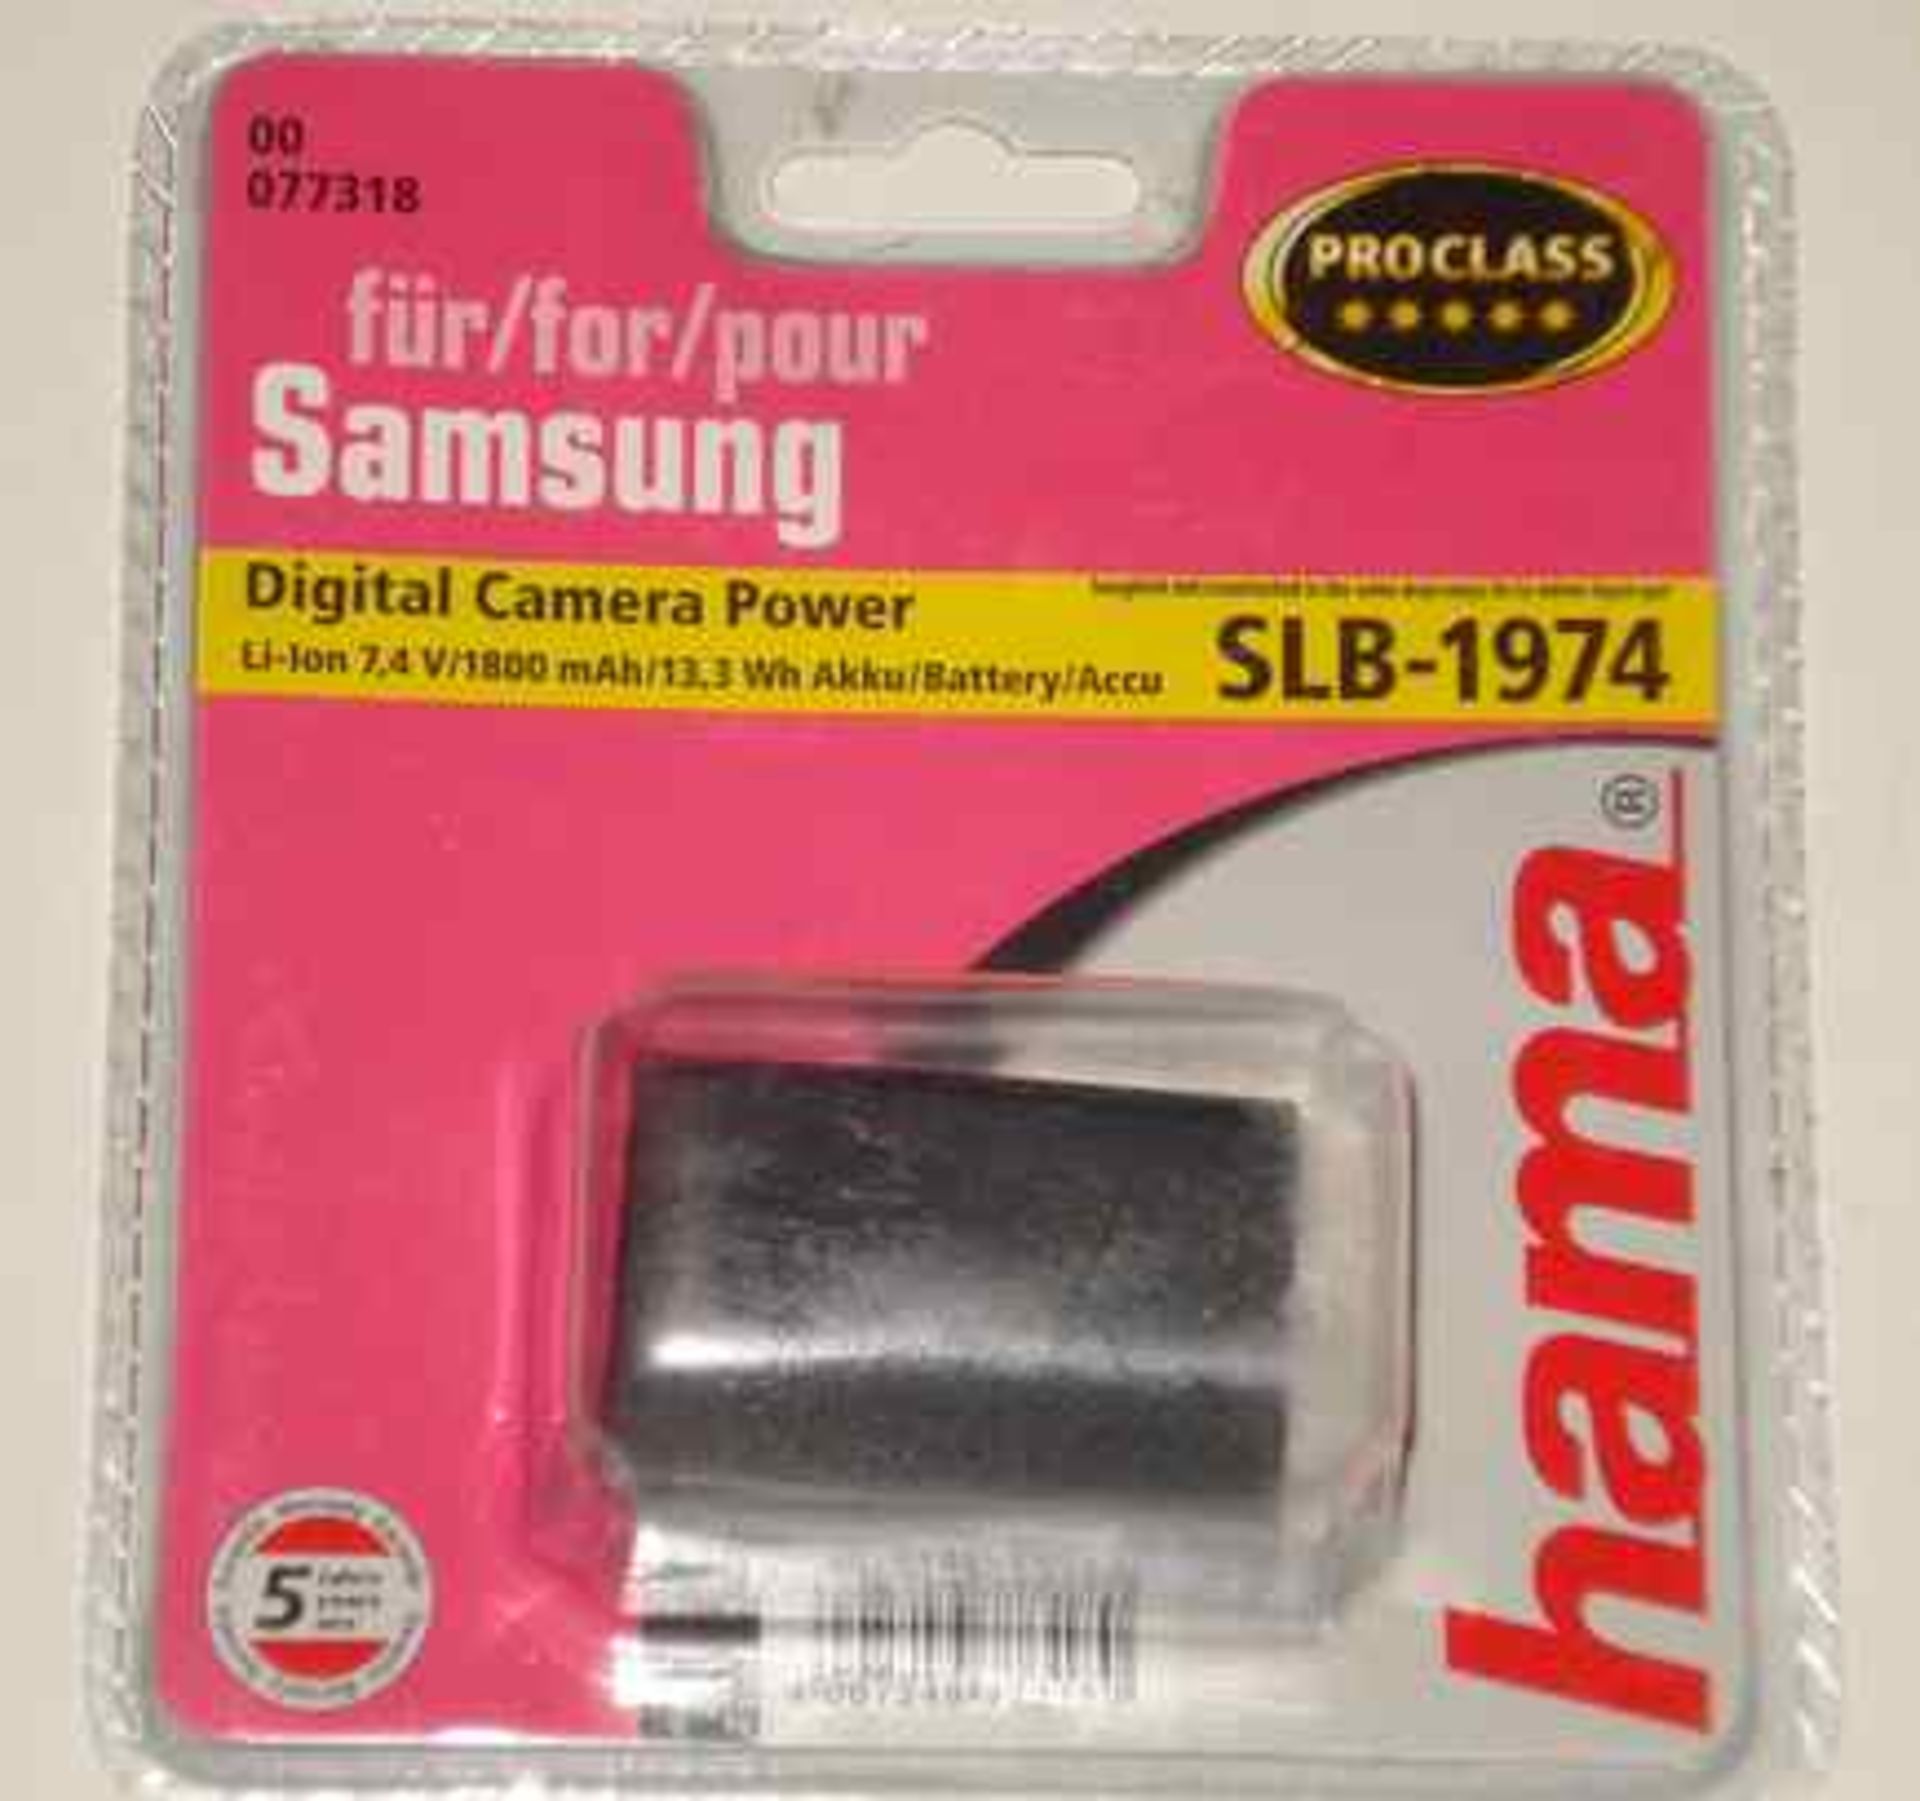 Samsung replacement camera battery